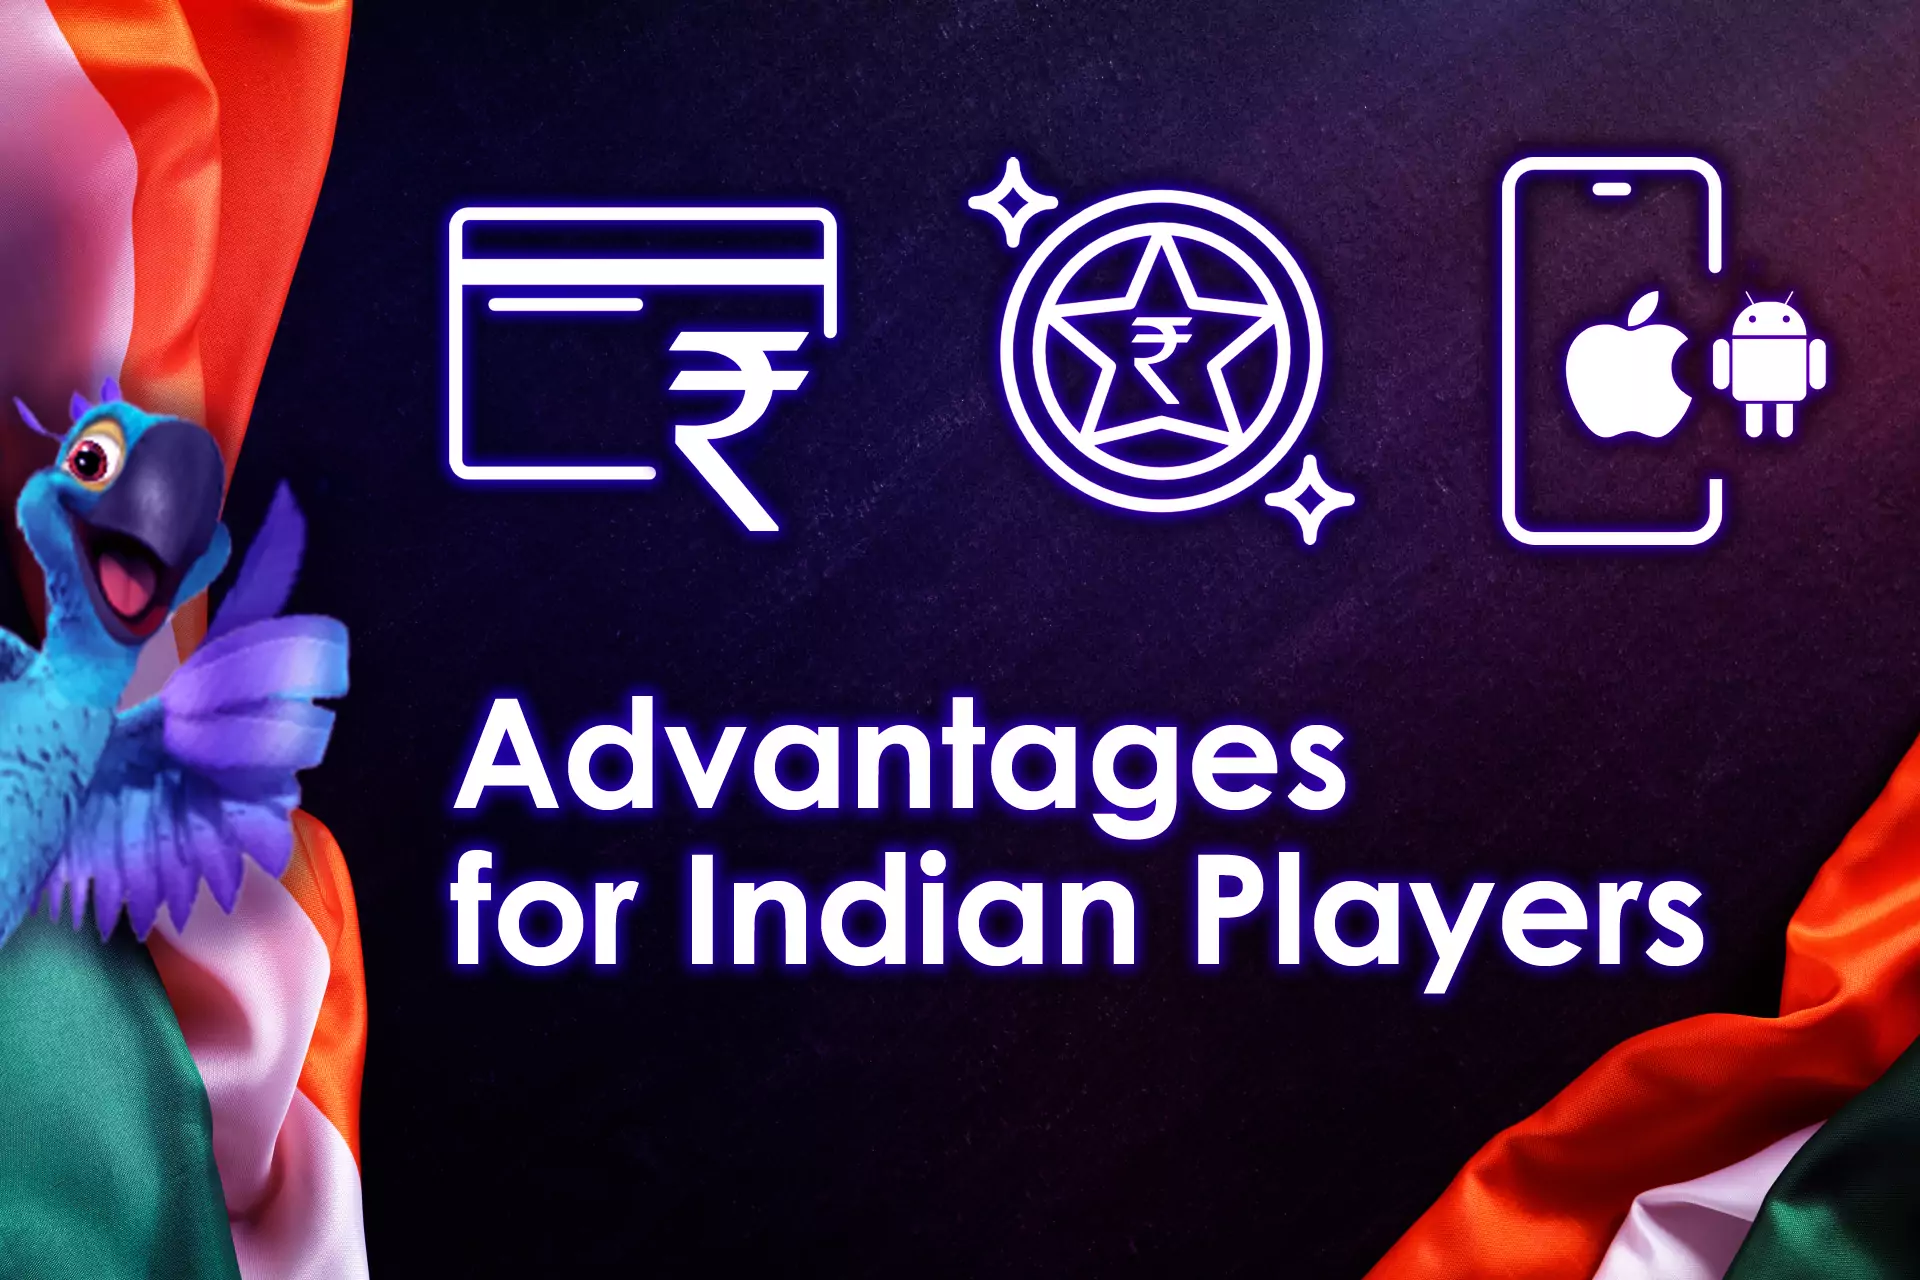 Players from India may admit access to the Indian payment systems and user-friendly apps for Android and iOS.